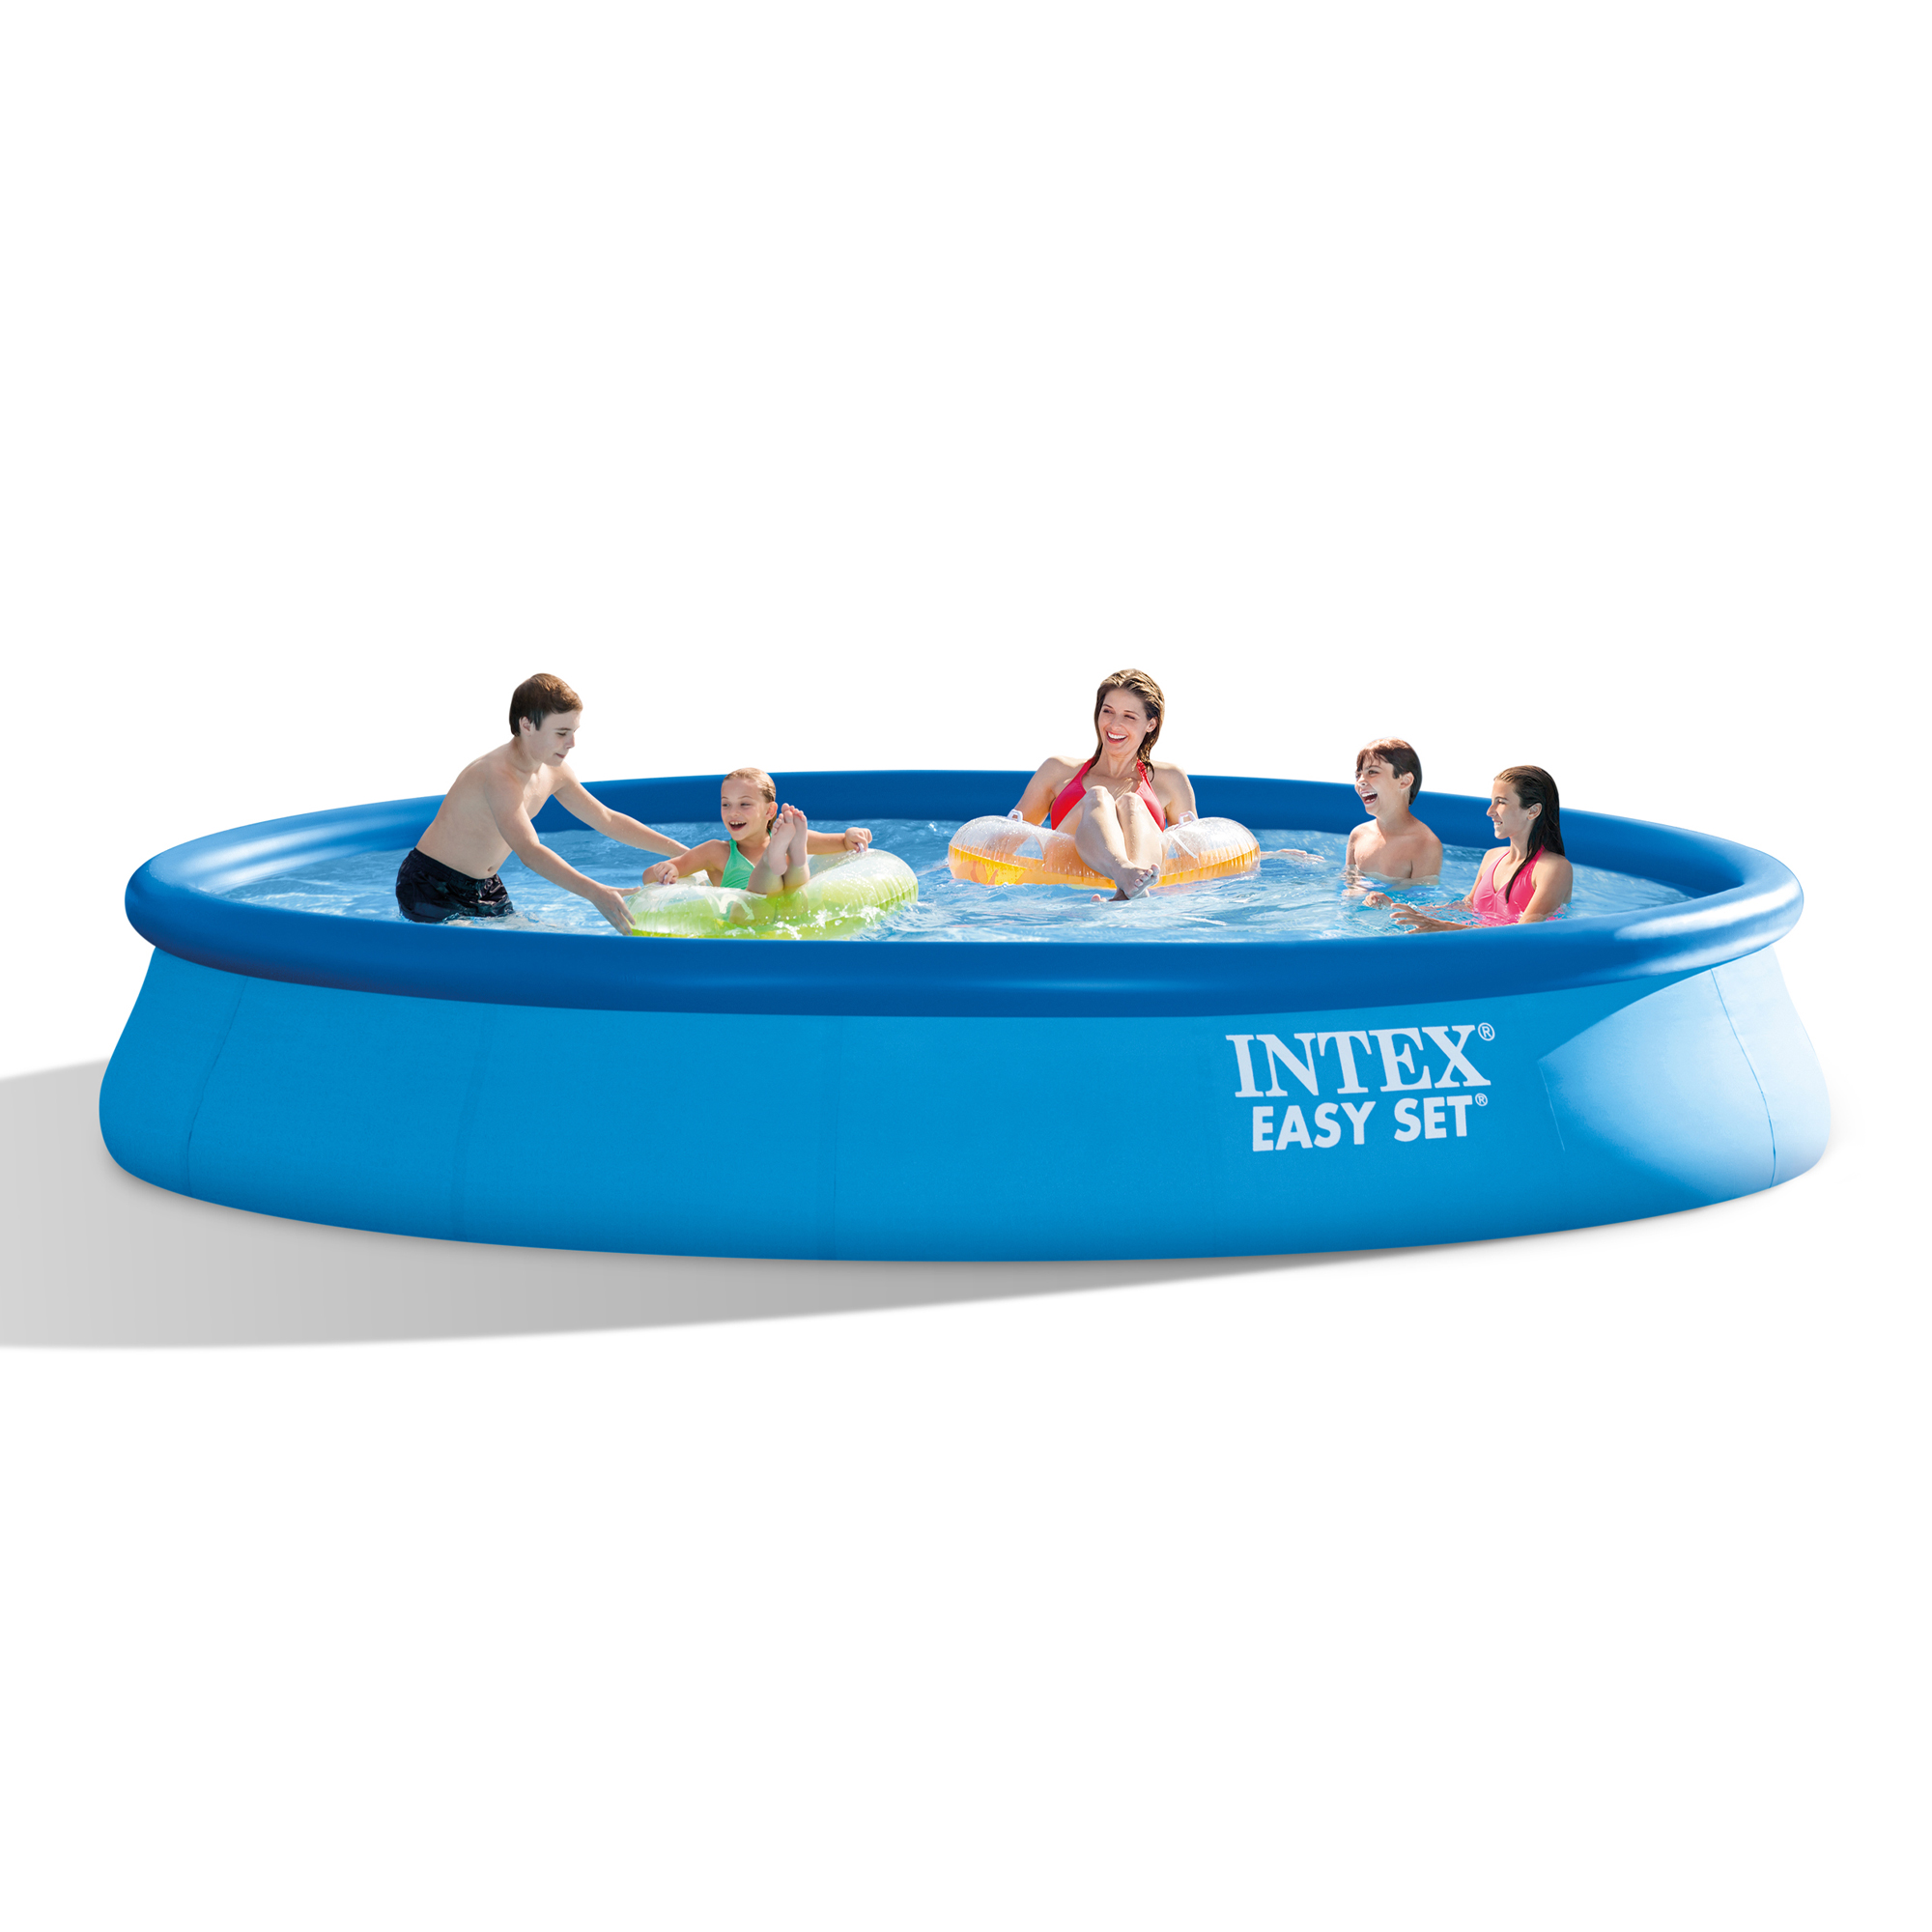 Intex Easy Set 15ft x 33in Inflatable Kid Family Swimming Pool with Filter Pump - image 2 of 12